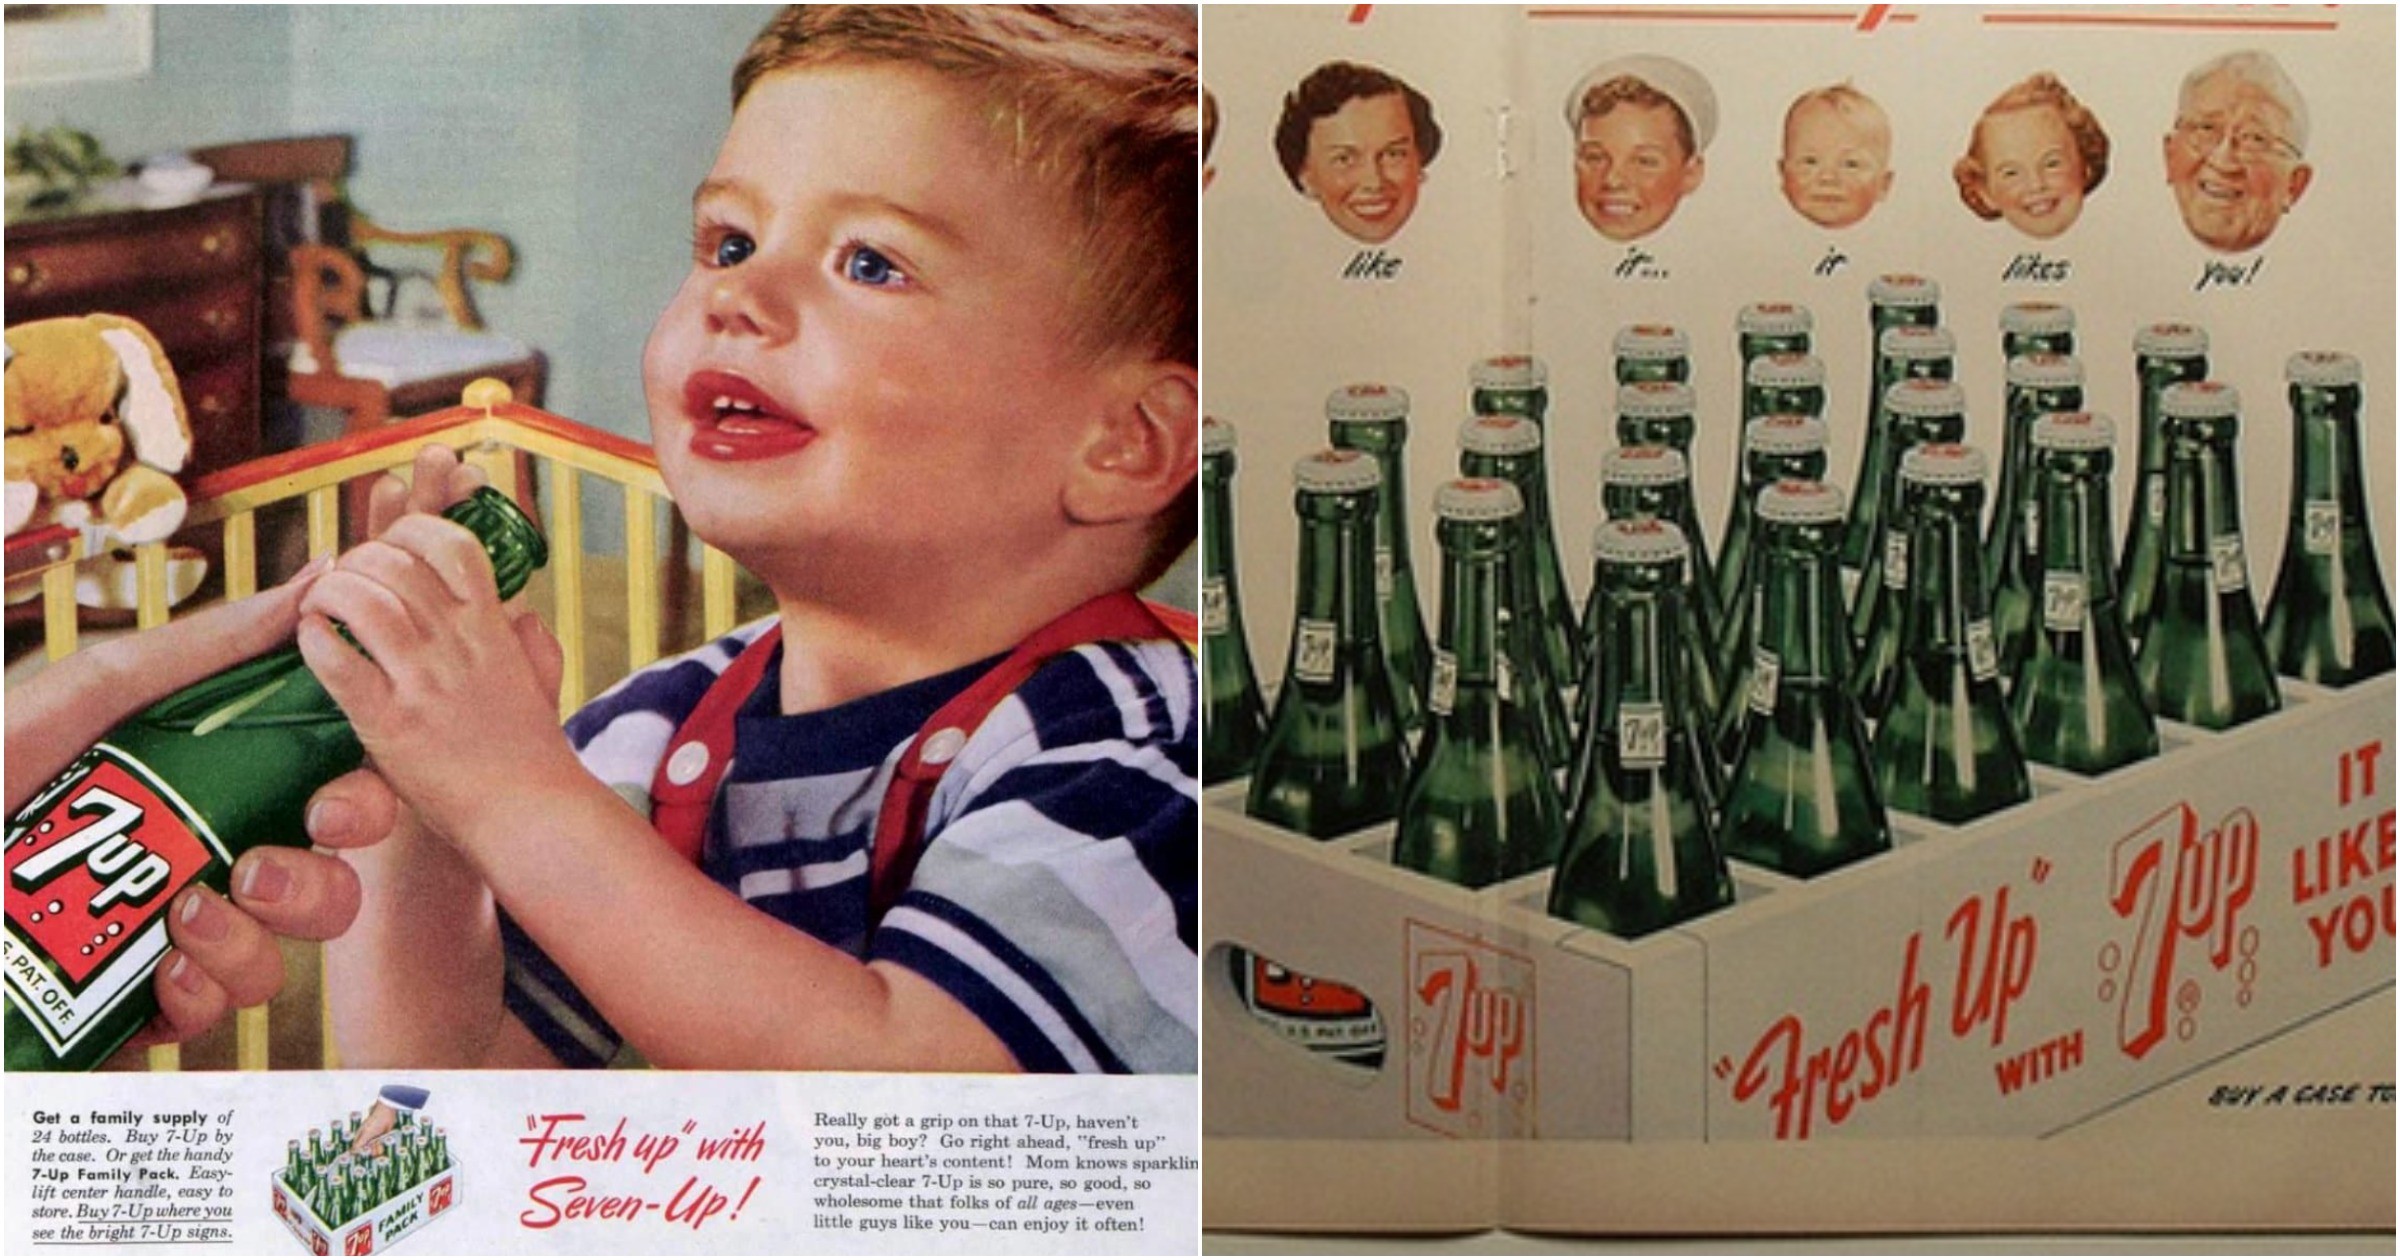 Antique 7up bottles by year